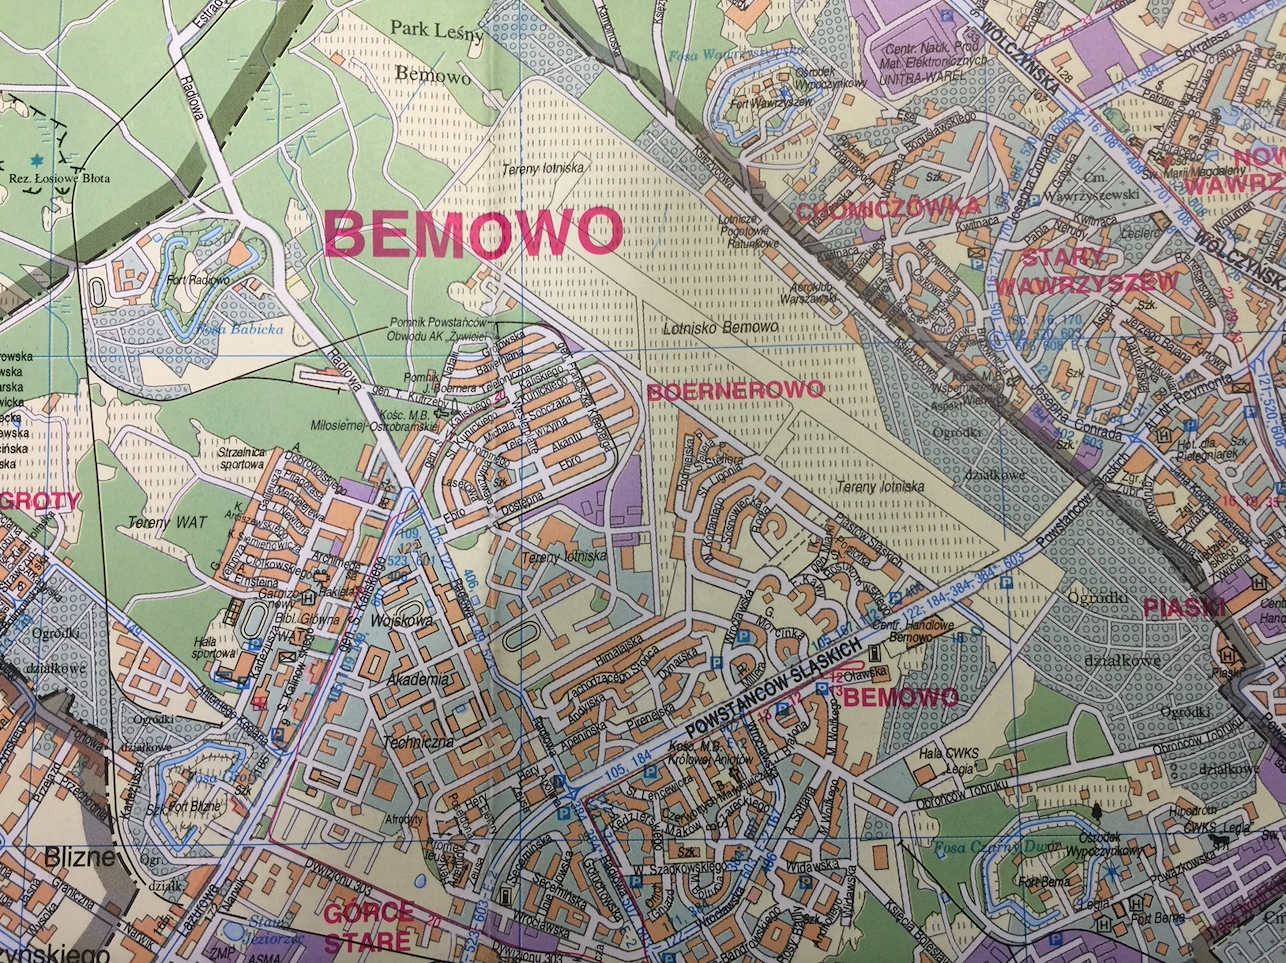 Bemowo airport on the map. 1998 year. Photo of LAC